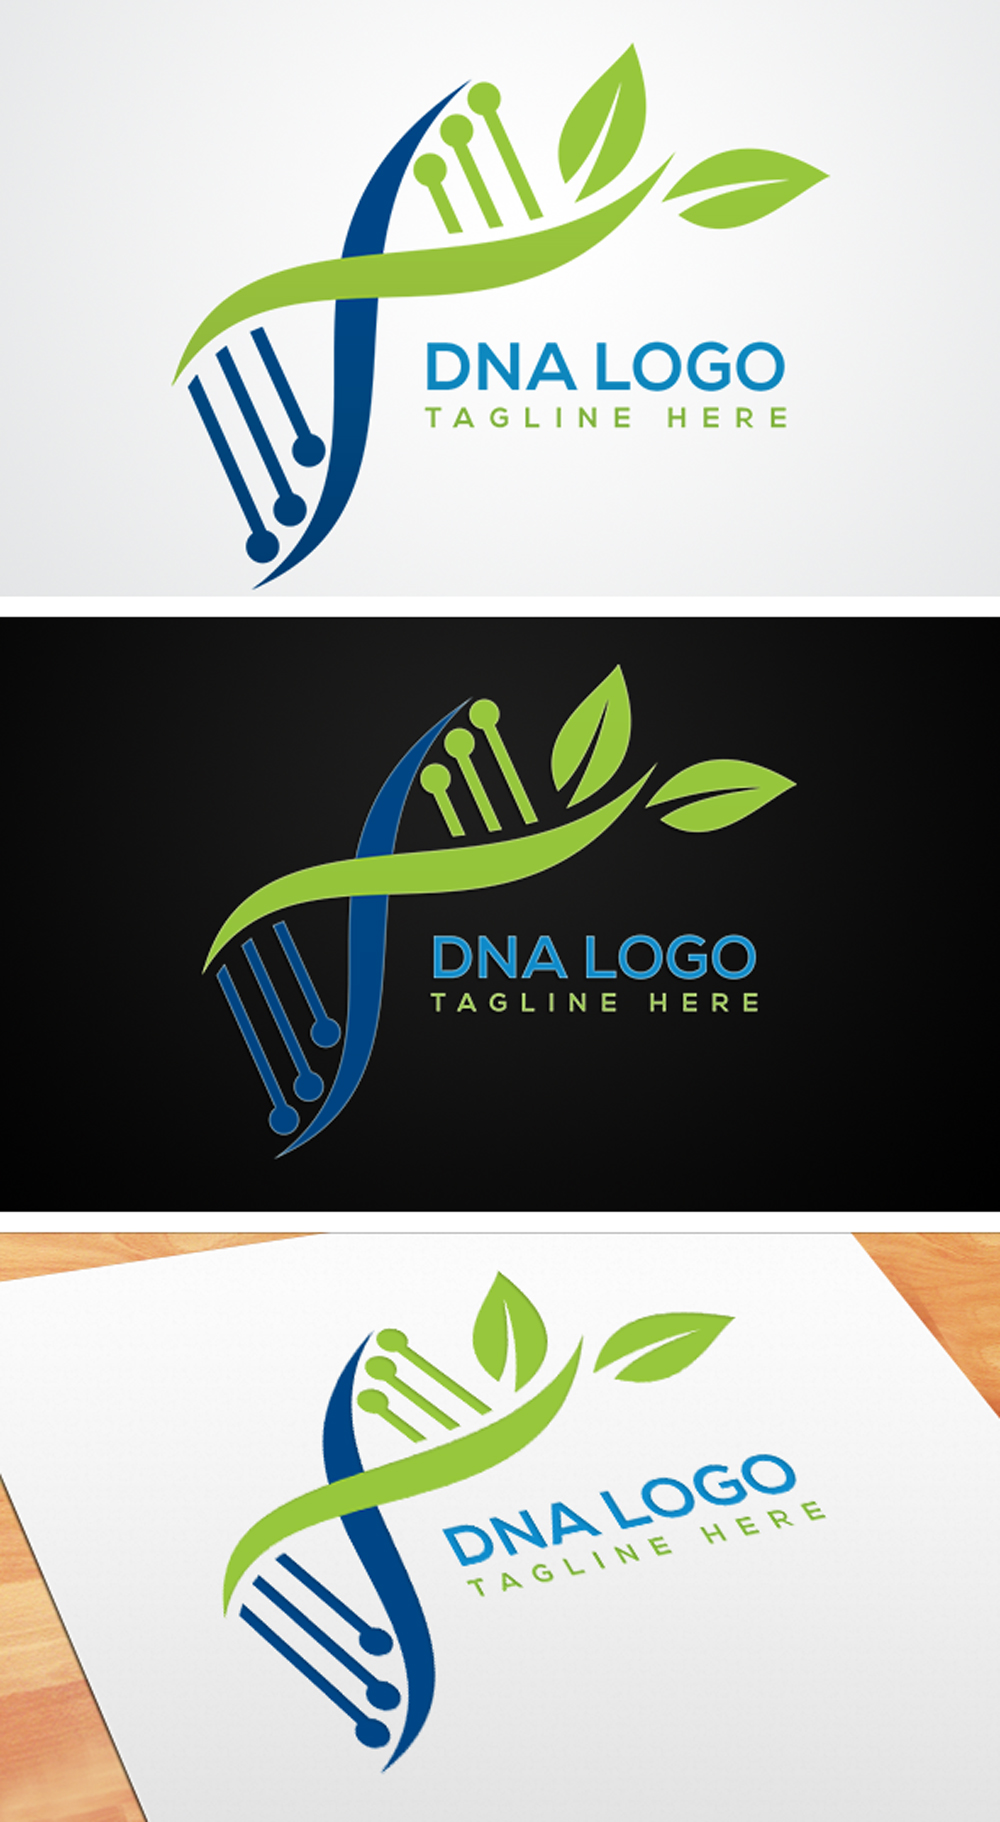 A selection of images of wonderful logos in the form of a form of DNA.